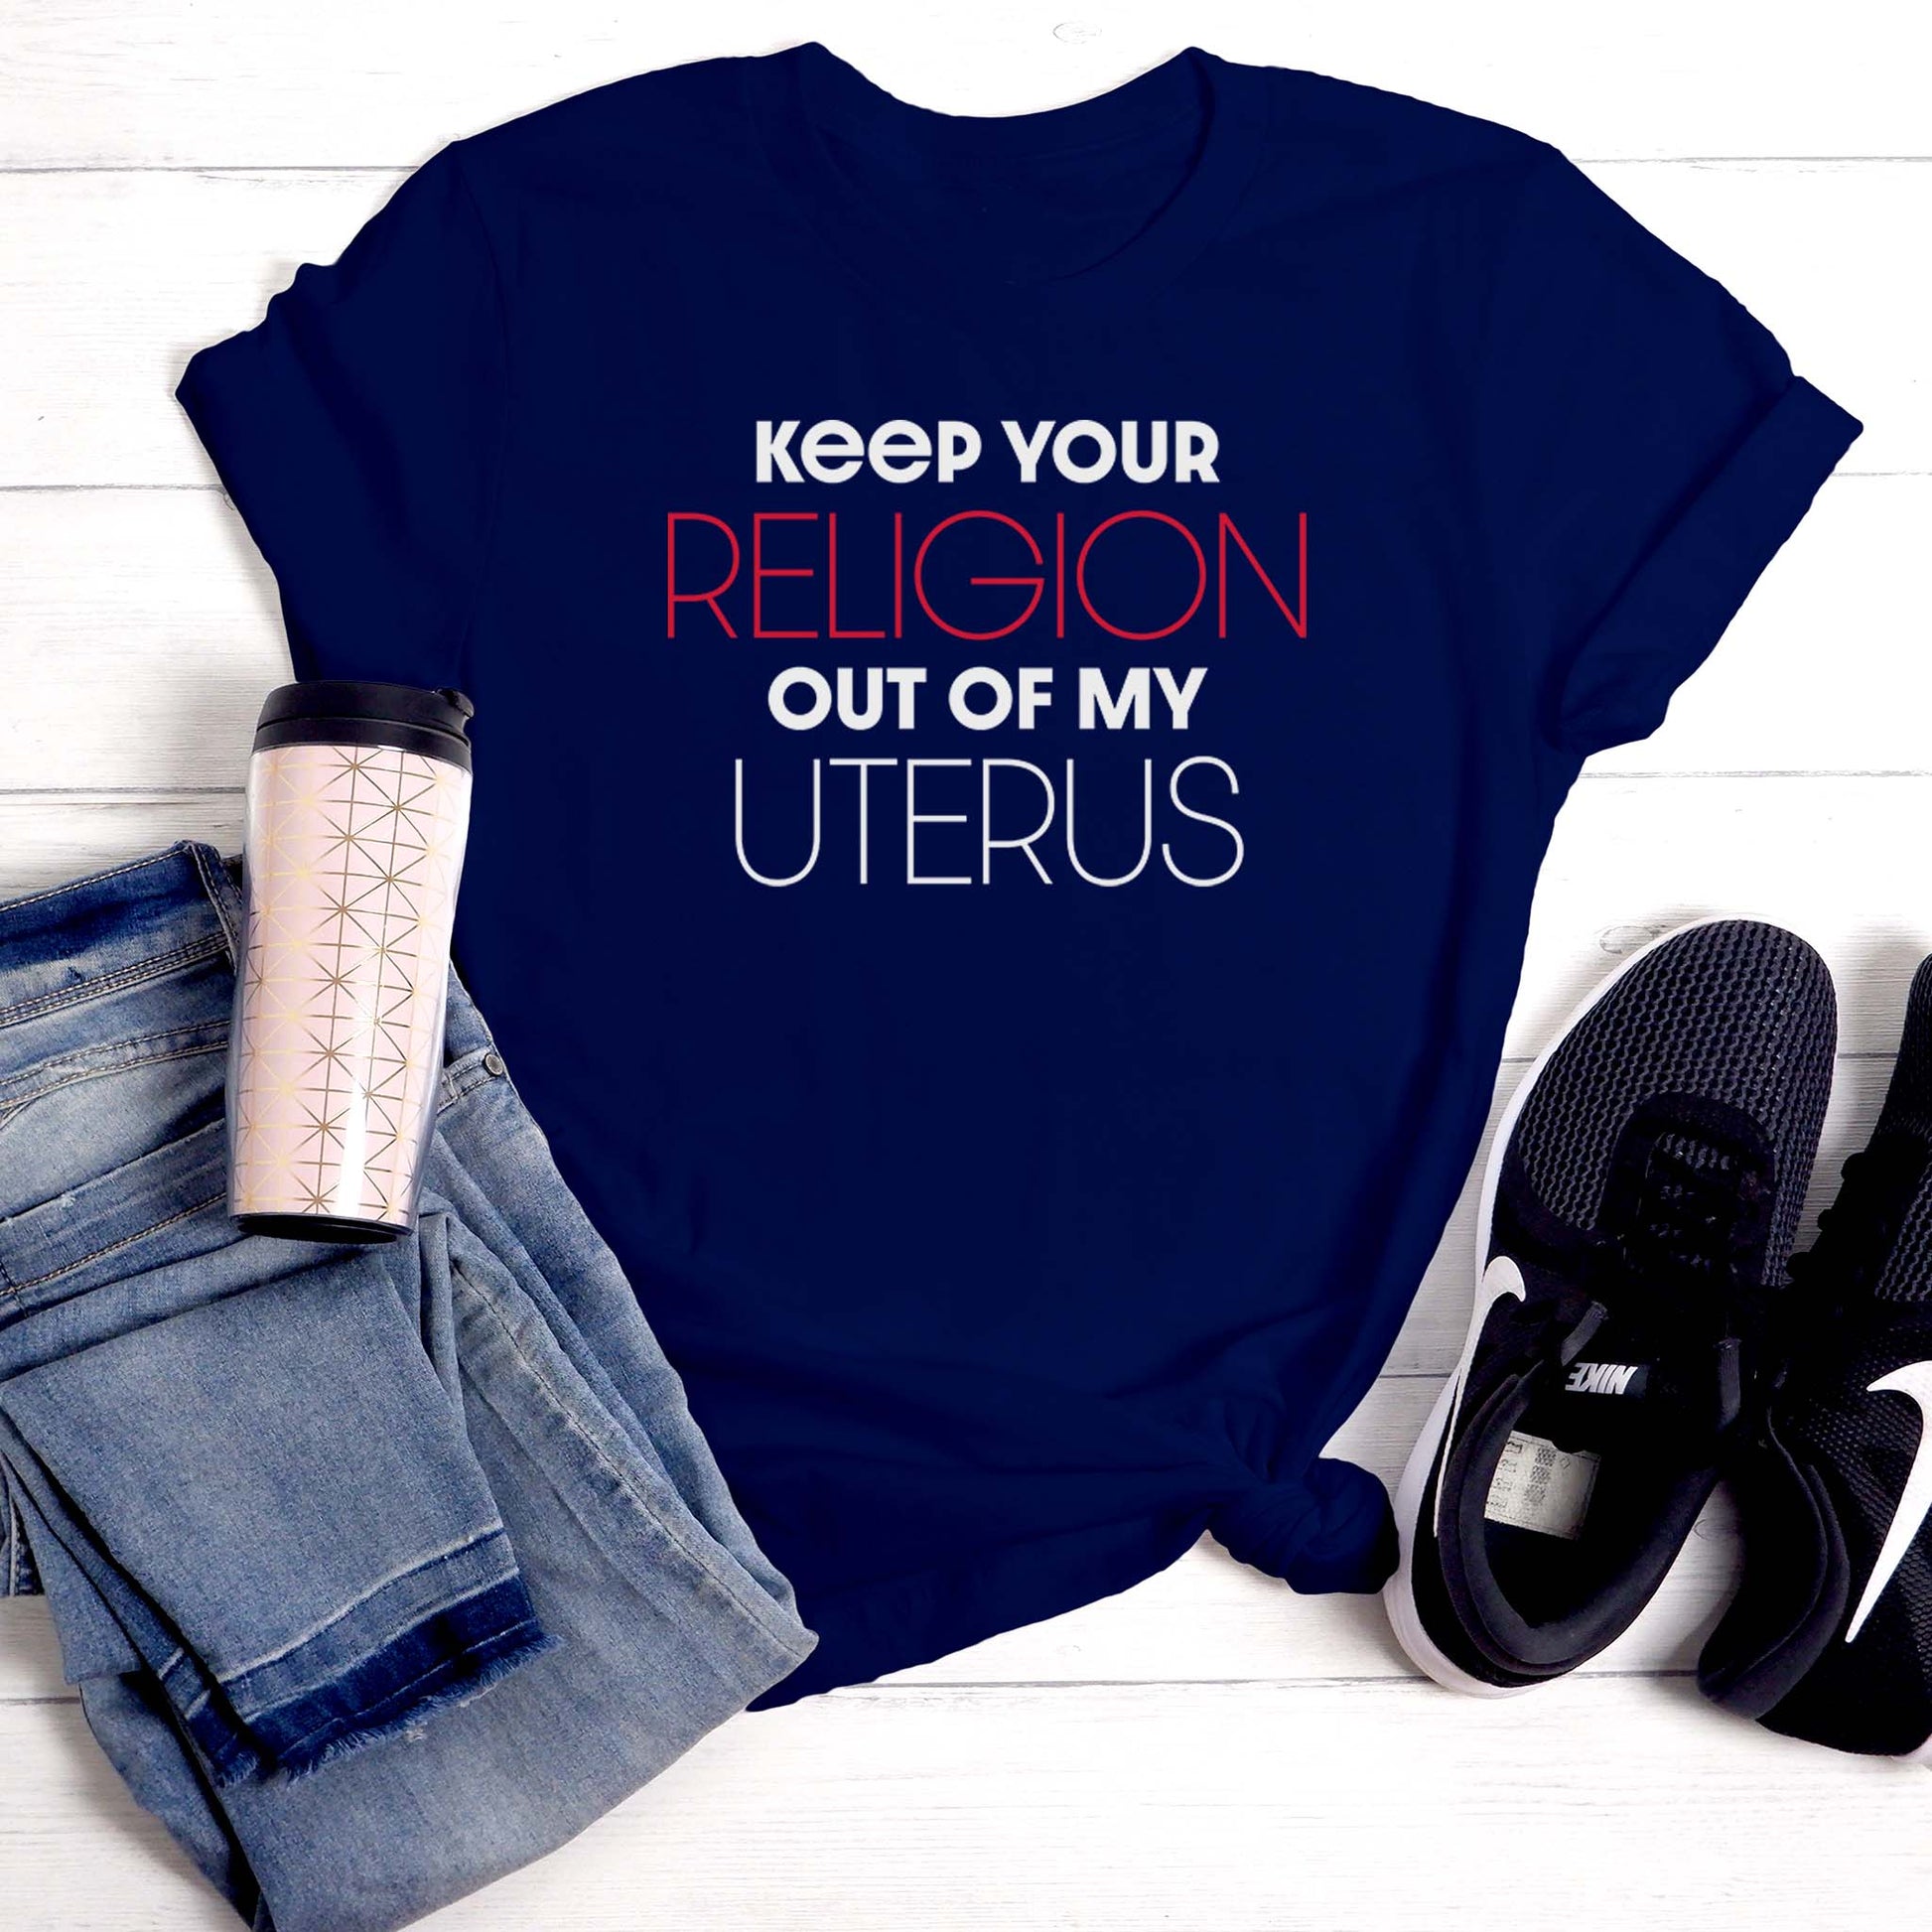 Navy unisex t-shirt that says, “Keep Your Religion Out of My Uterus” in all caps. “Keep Your” is bold, “Religion” is on the next line, is a larger size, and is red, “out of my” is beneath that and in bold, and “uterus” is on the last line